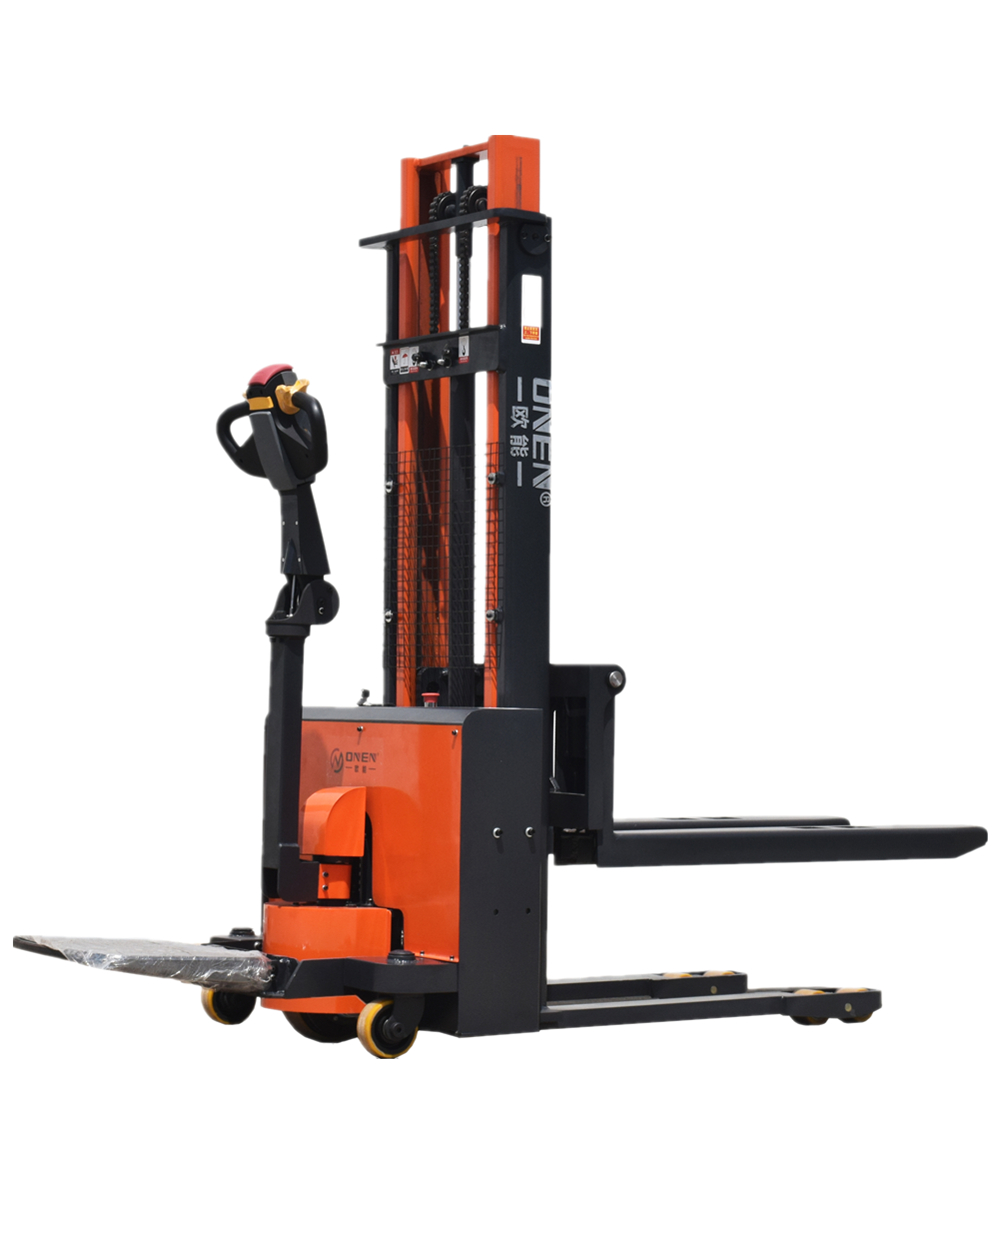 Pallet Stacker Electric Warehouse Material Handling Equipment